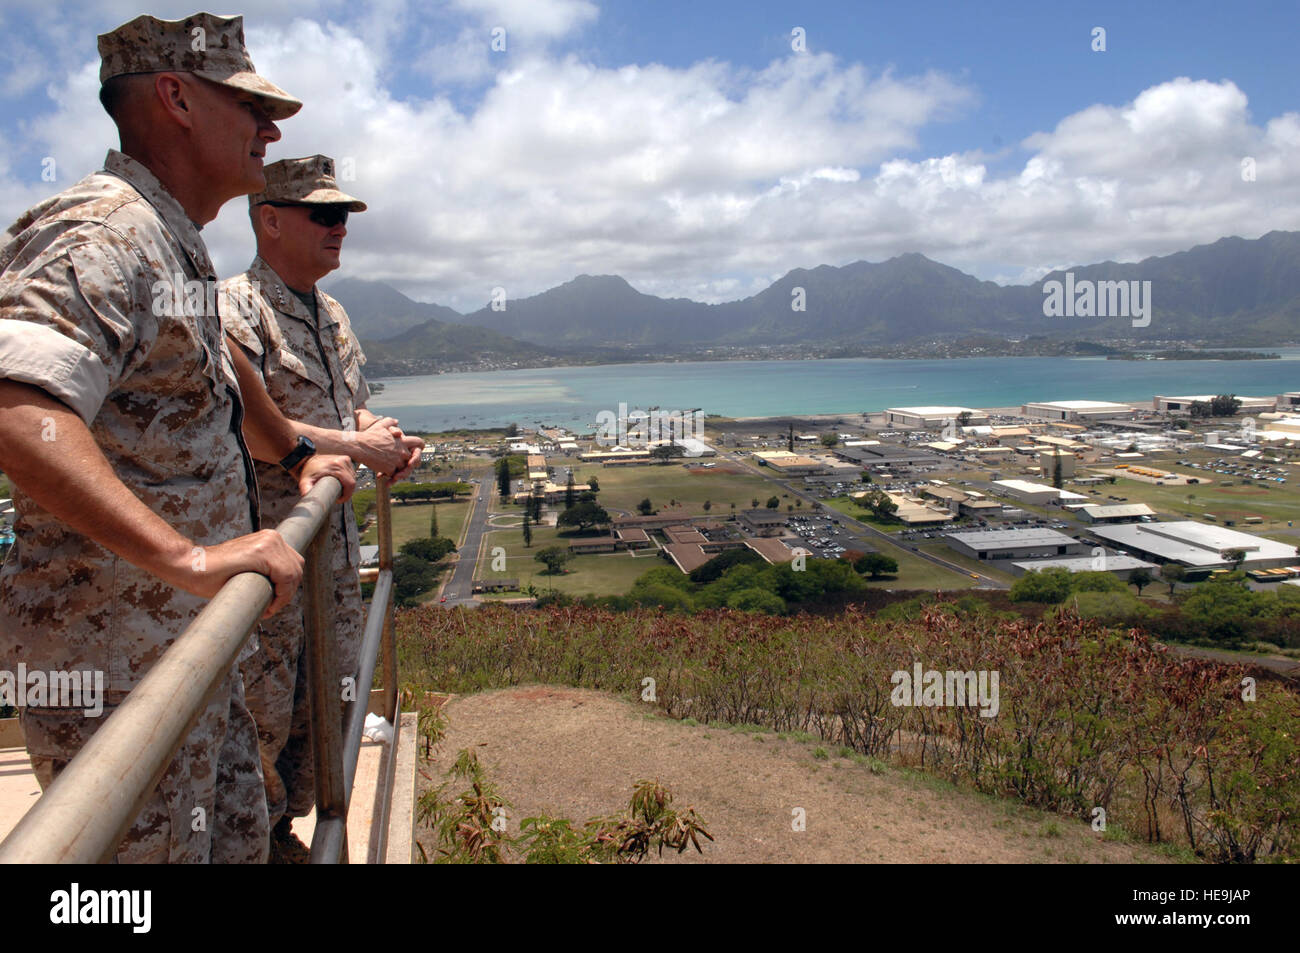 Vice Chairman of the Joint Chiefs of Staff Marine Gen. James E. Cartwright, right, and Marine Brig. Gen. McMillian, look out over Marine Corps Air Station Kaneohe, Hawaii, April 21, 2008. Cartwright visited the installation to meet with wounded warriors.  Air Force Tech. Sgt. Adam M. Stump. (Released) Stock Photo